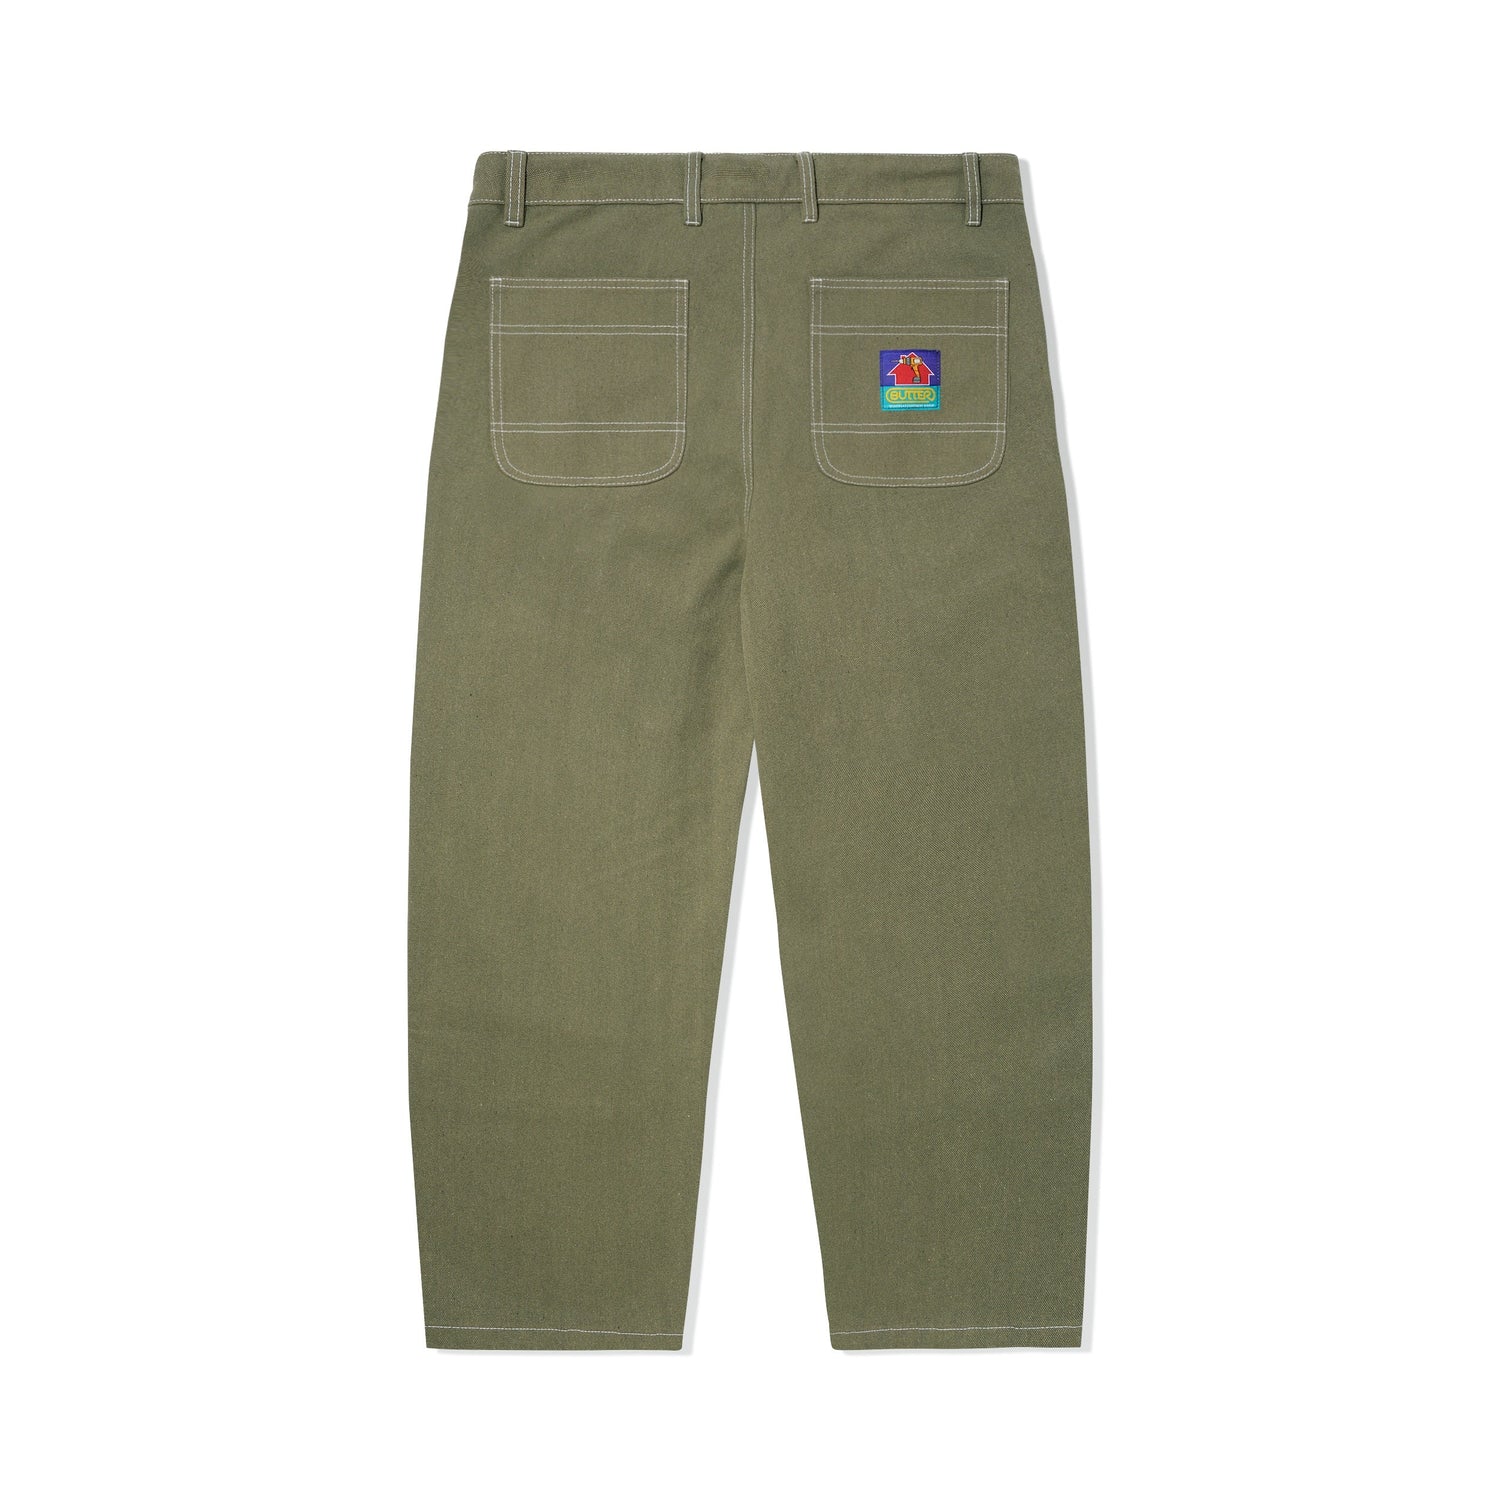 Washed Canvas Double Knee Pants, Fern